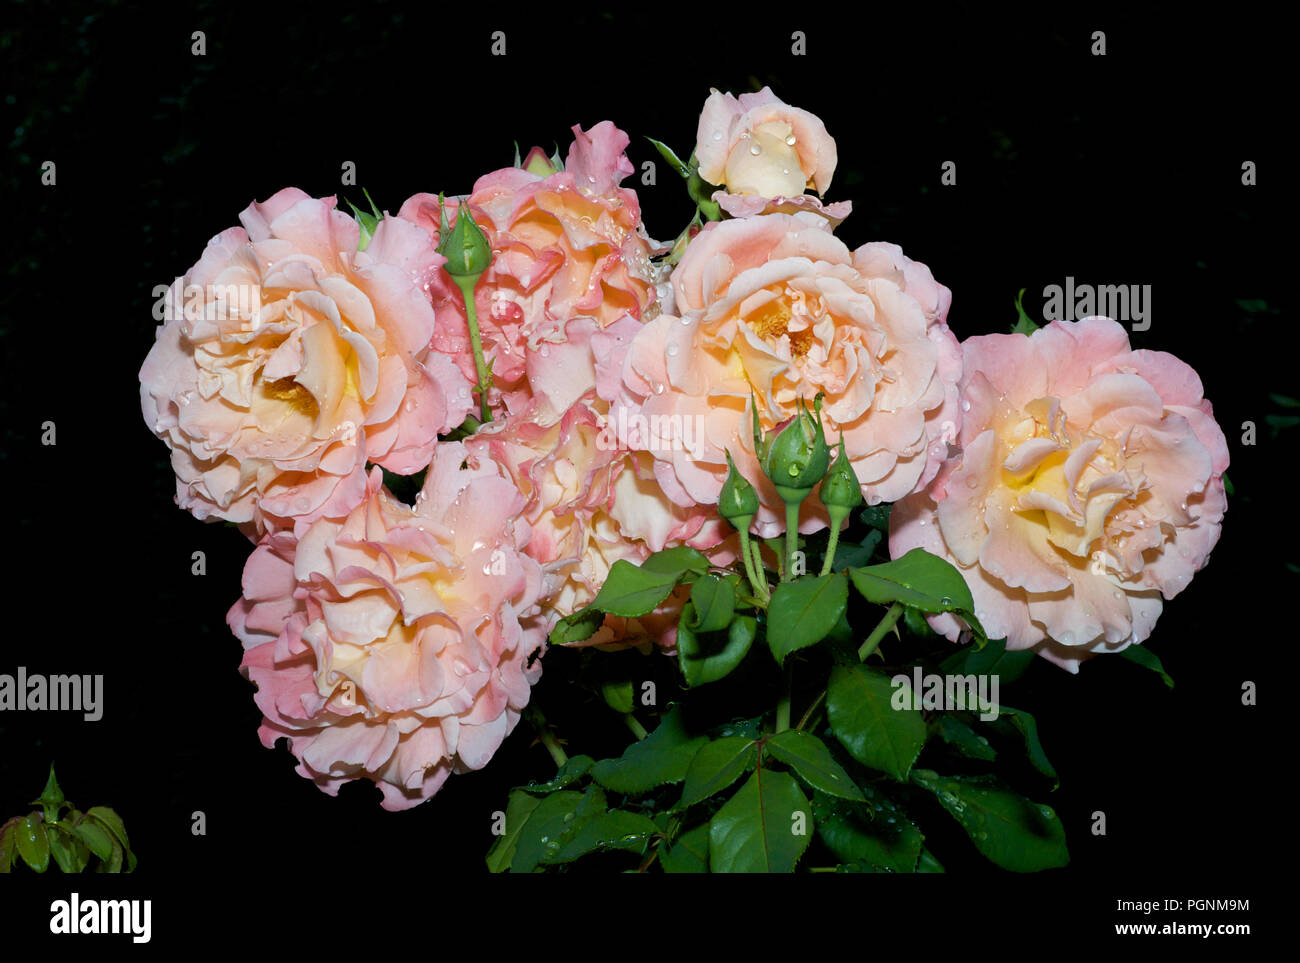 Fresh Thaw on a Bunch of  Pale Pink Roses on Black Background Stock Photo